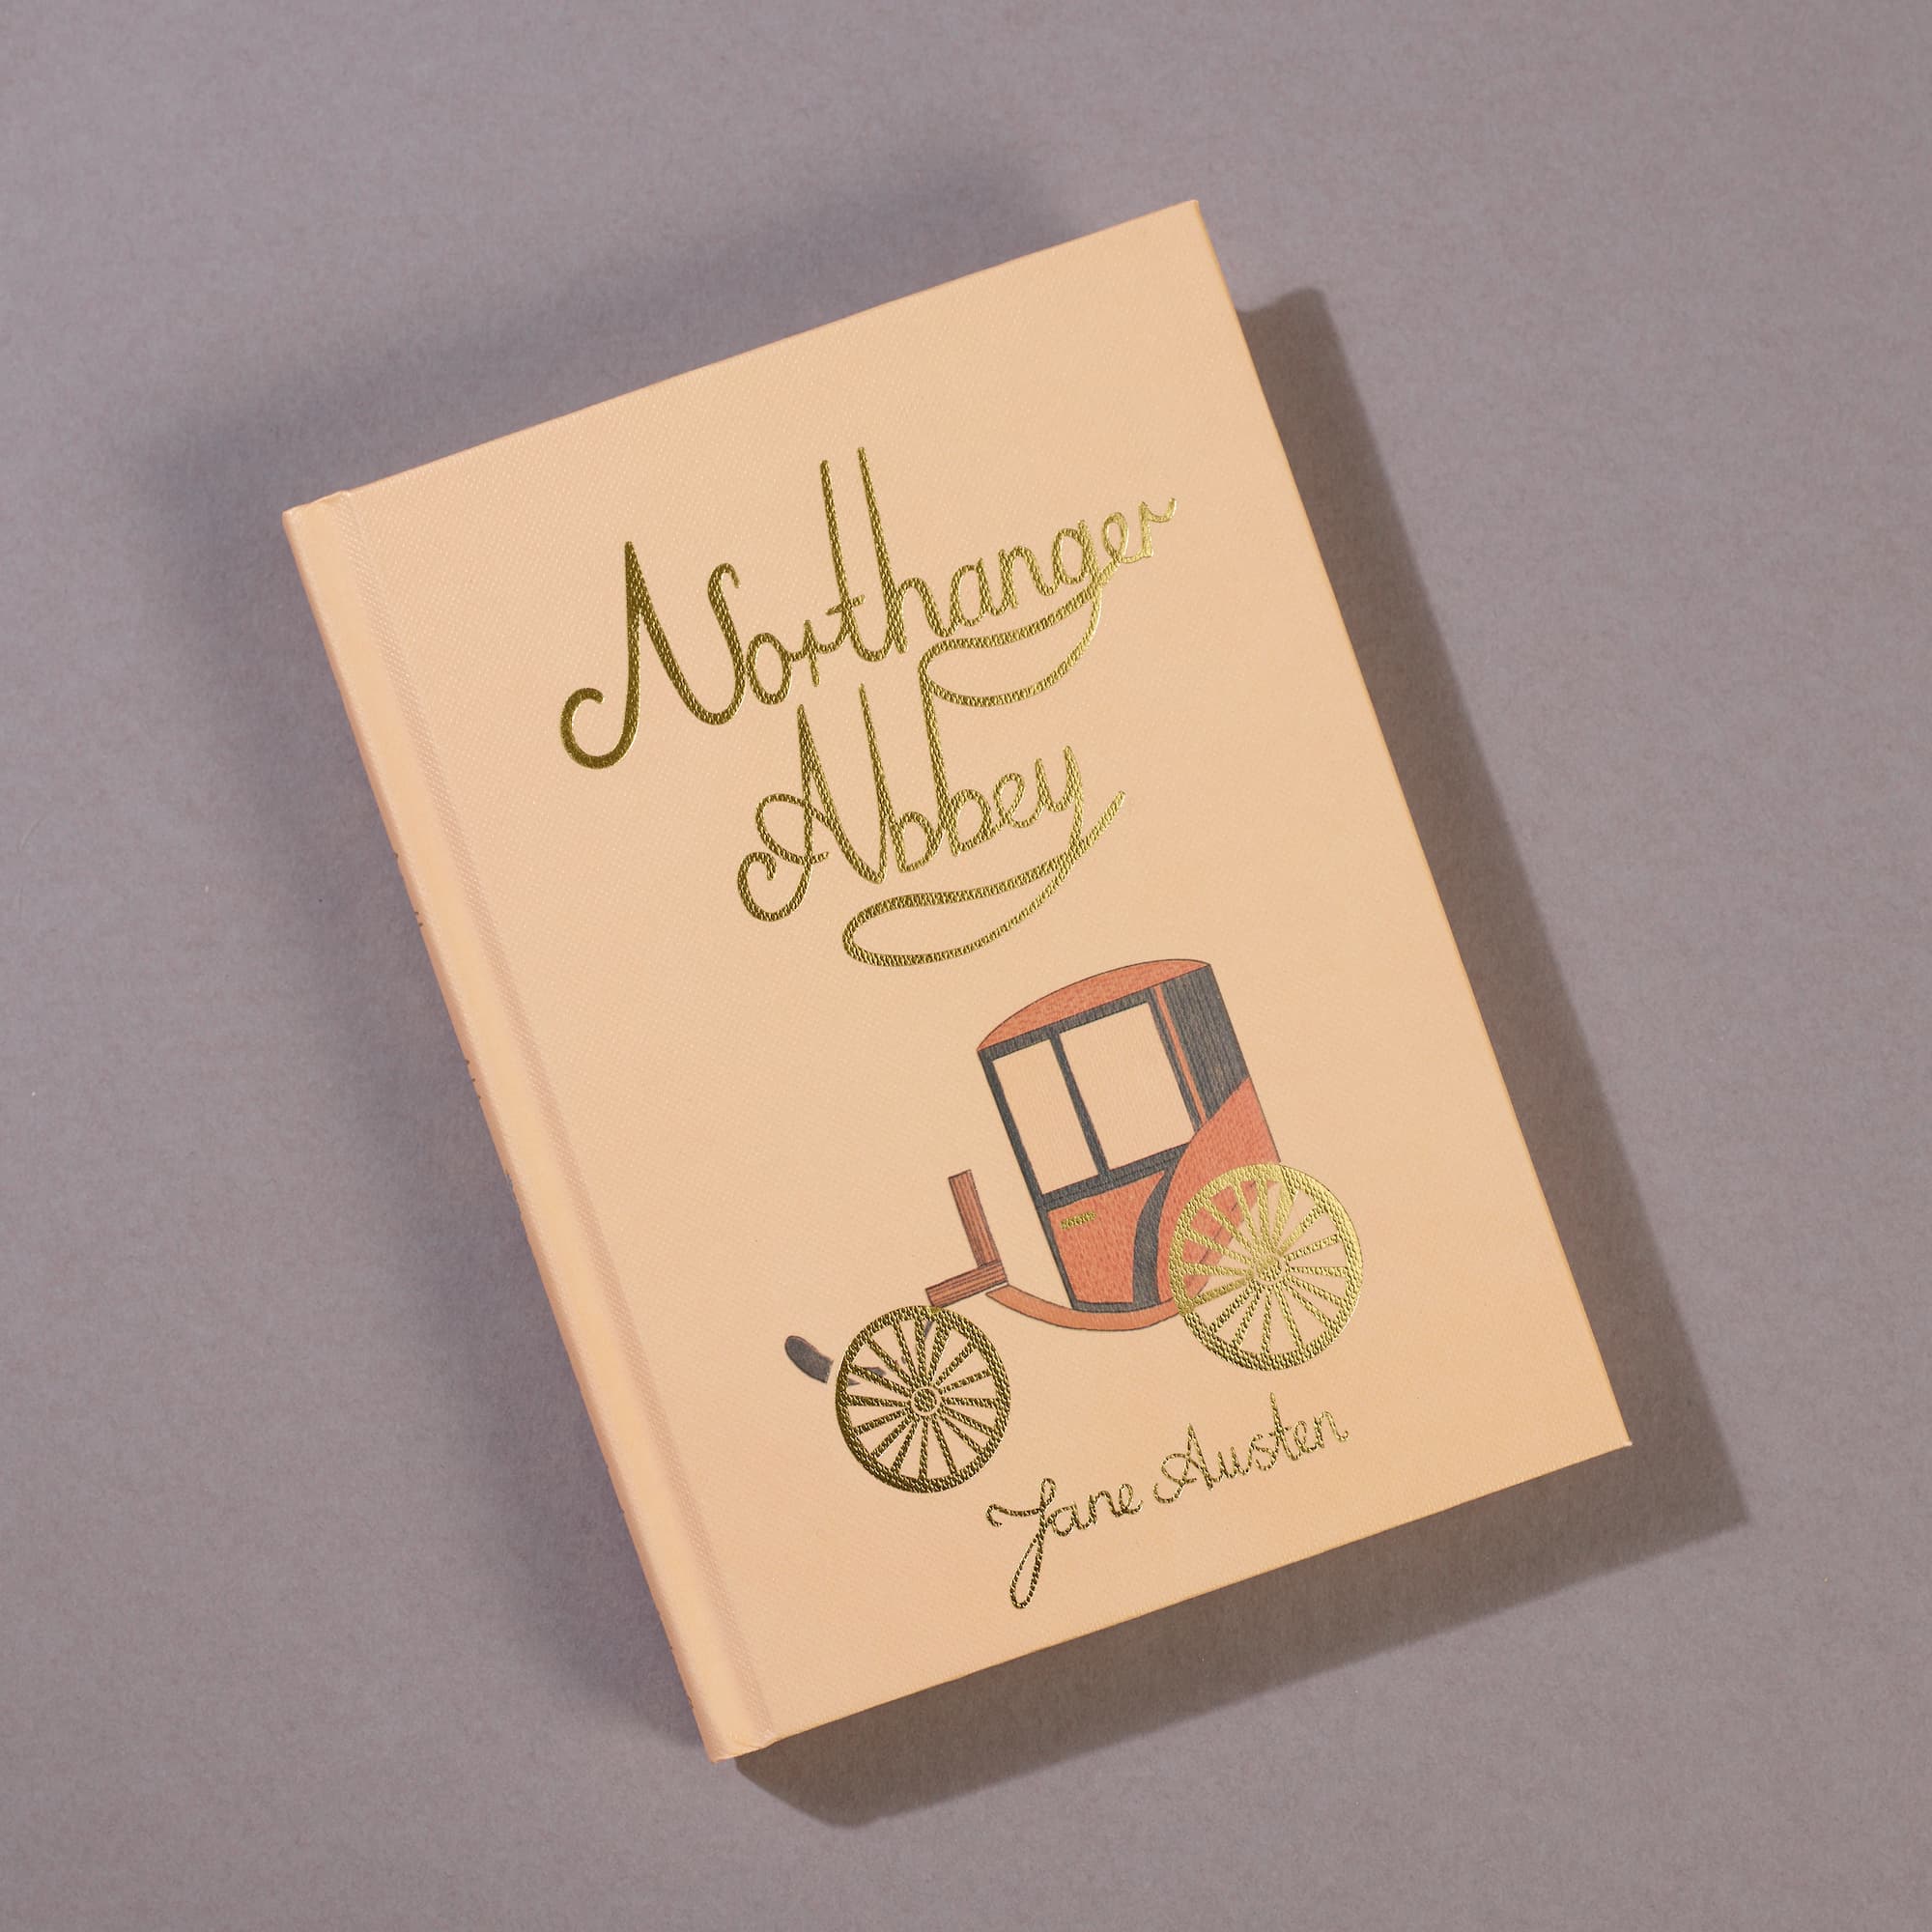 Northanger Abbey Collectors Edition